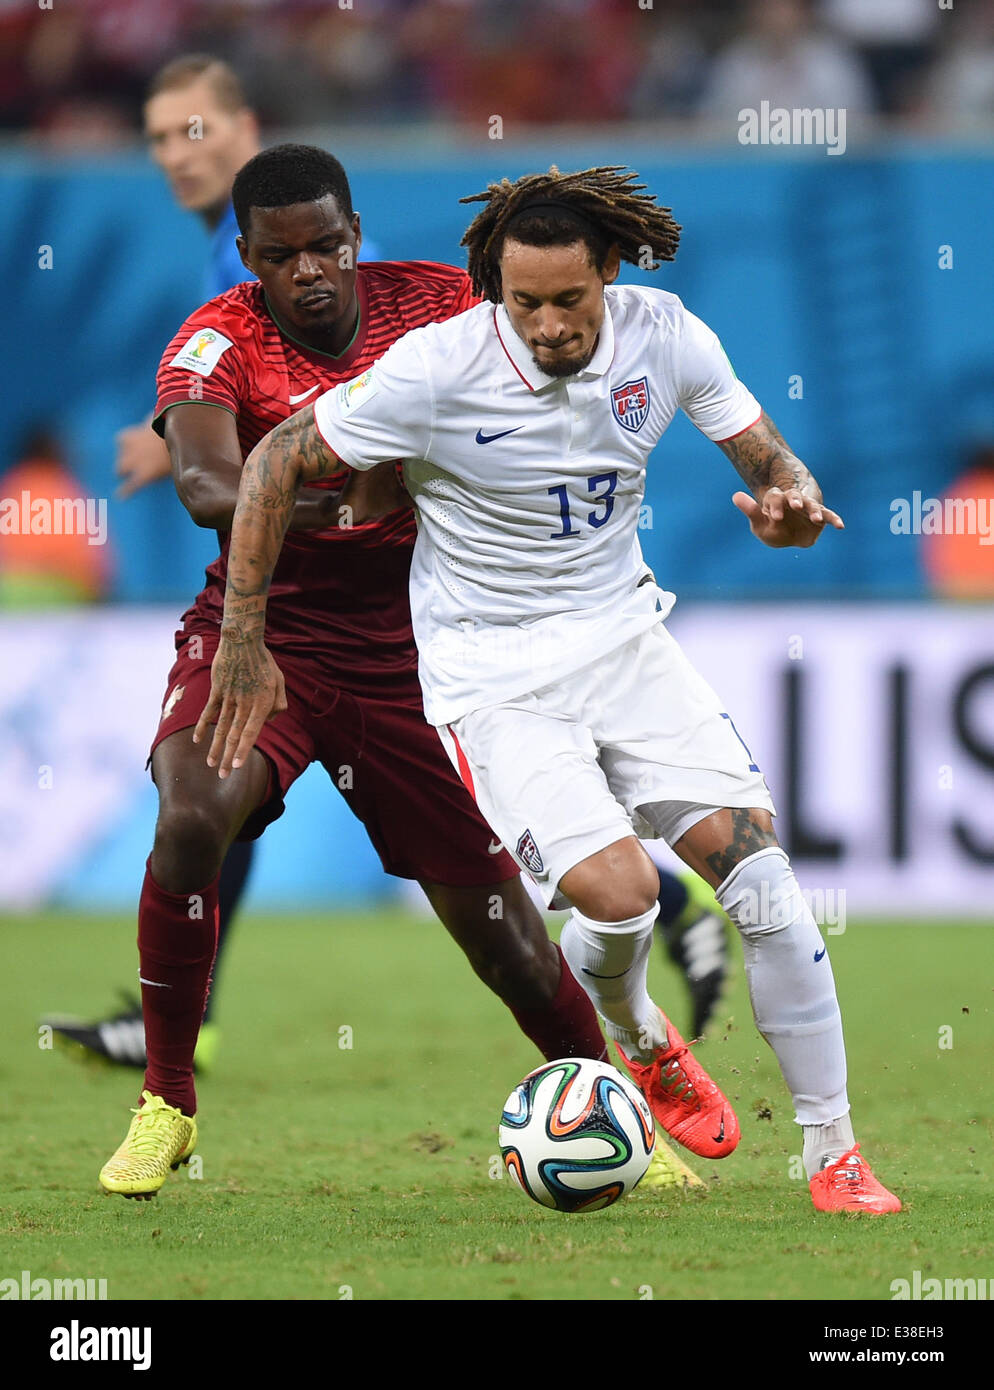 Manaus, Brazil. 22nd June, 2014. William Carvalho(L) of Portugal in action against Jermaine Jones of USA during the FIFA World Cup 2014 group G preliminary round match between the USA and Portugal at the Arena Amazonia Stadium in Manaus, Brazil, 22 June 2014. Photo: Marius Becker/dpa/Alamy Live News Stock Photo